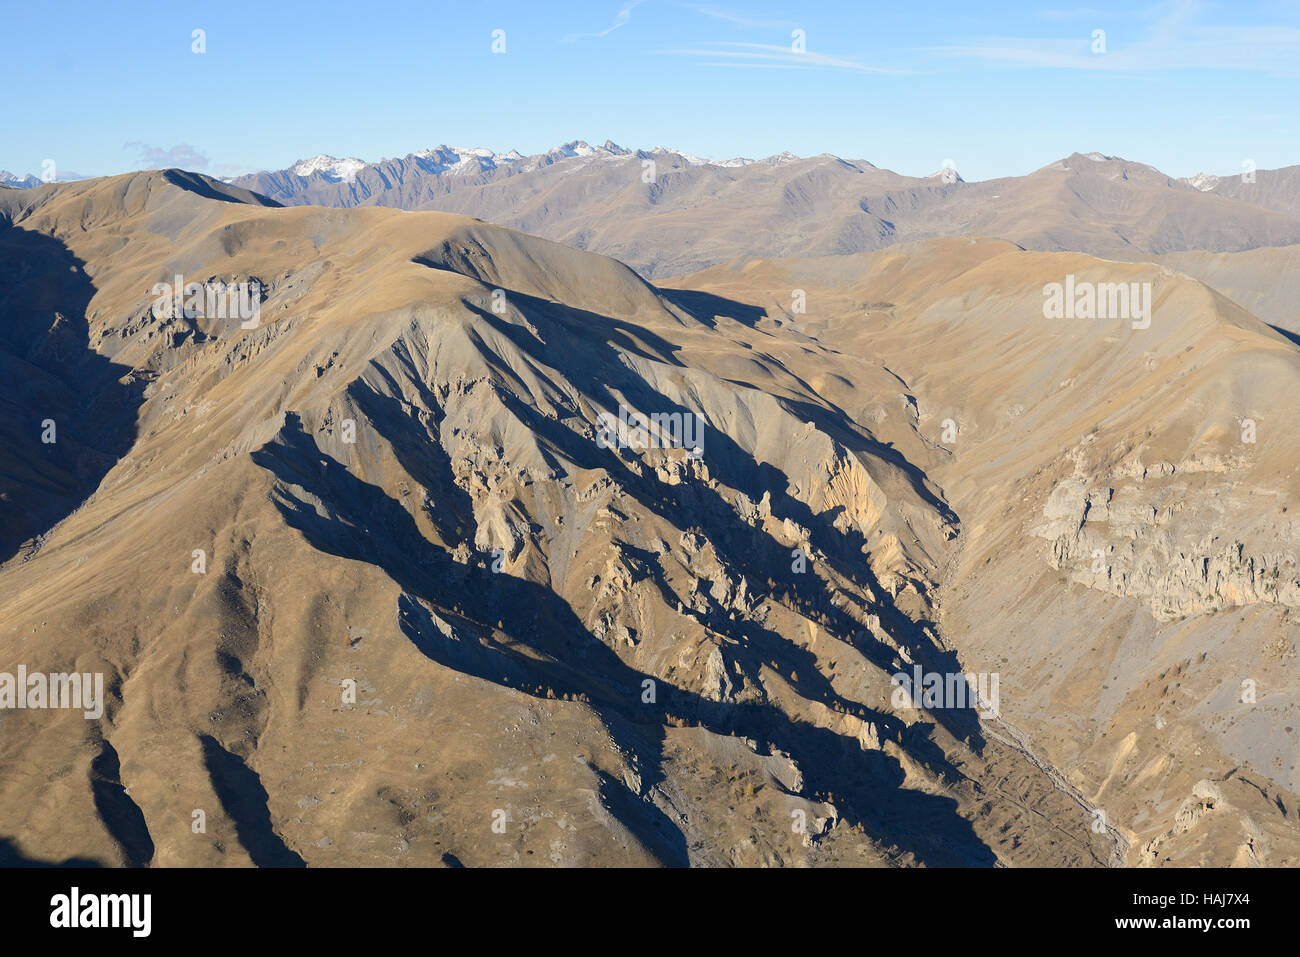 AERIAL VIEW. High altitude mineral world of the Mercantour National Park in november. Vignos, Alpes-Maritimes, France. Stock Photo